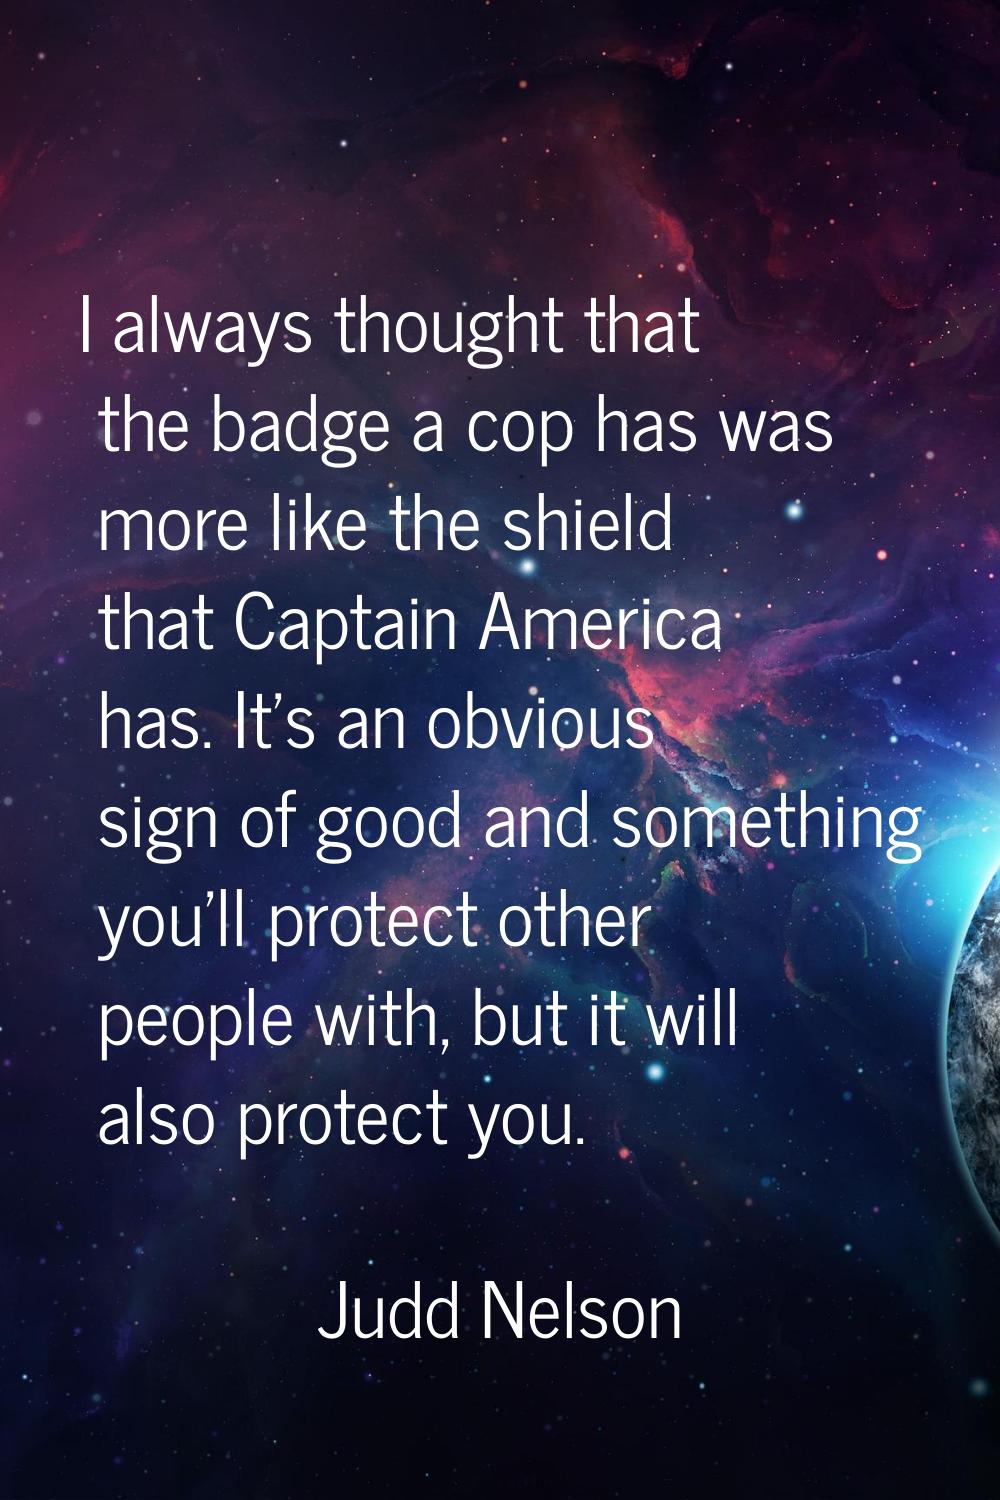 I always thought that the badge a cop has was more like the shield that Captain America has. It's a